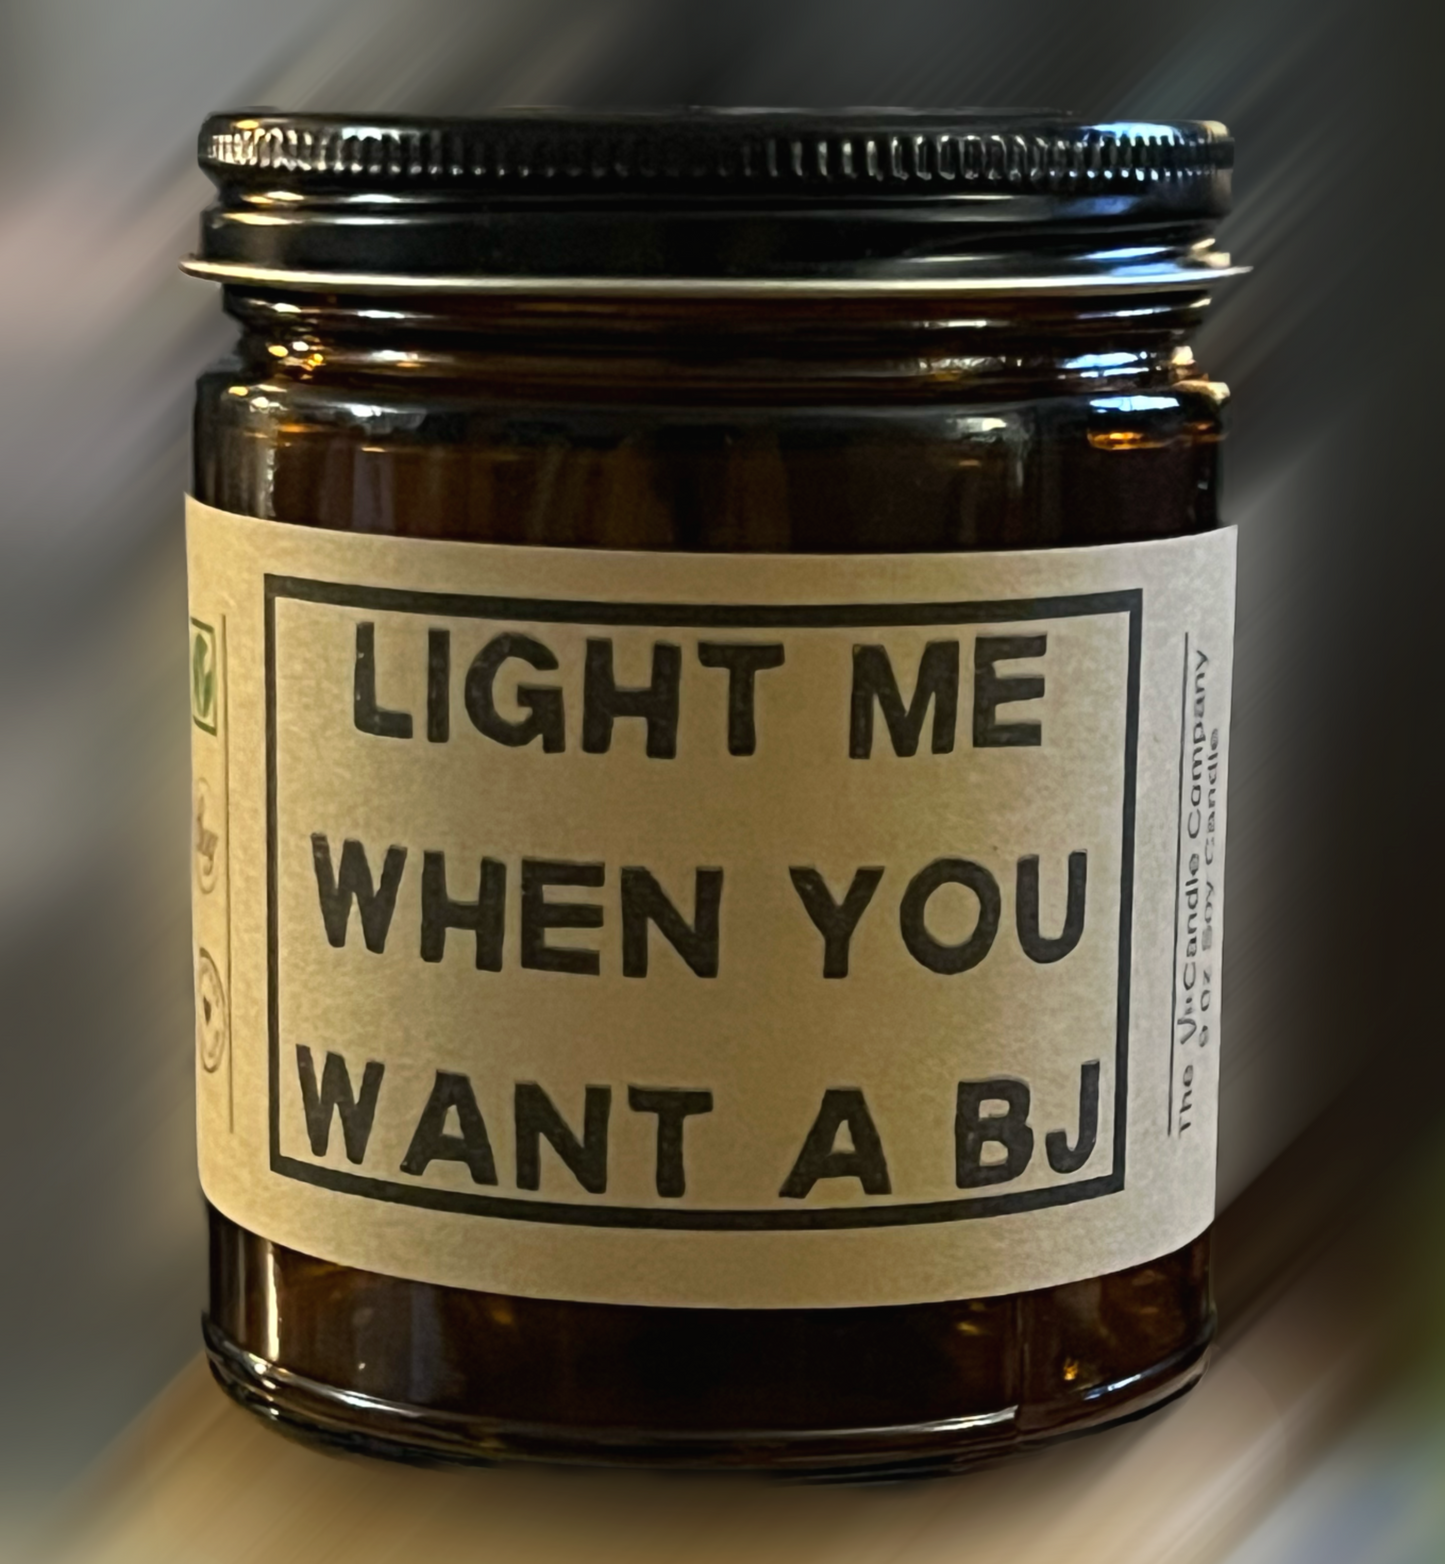 Light Me When You Want a BJ Novelty Candle